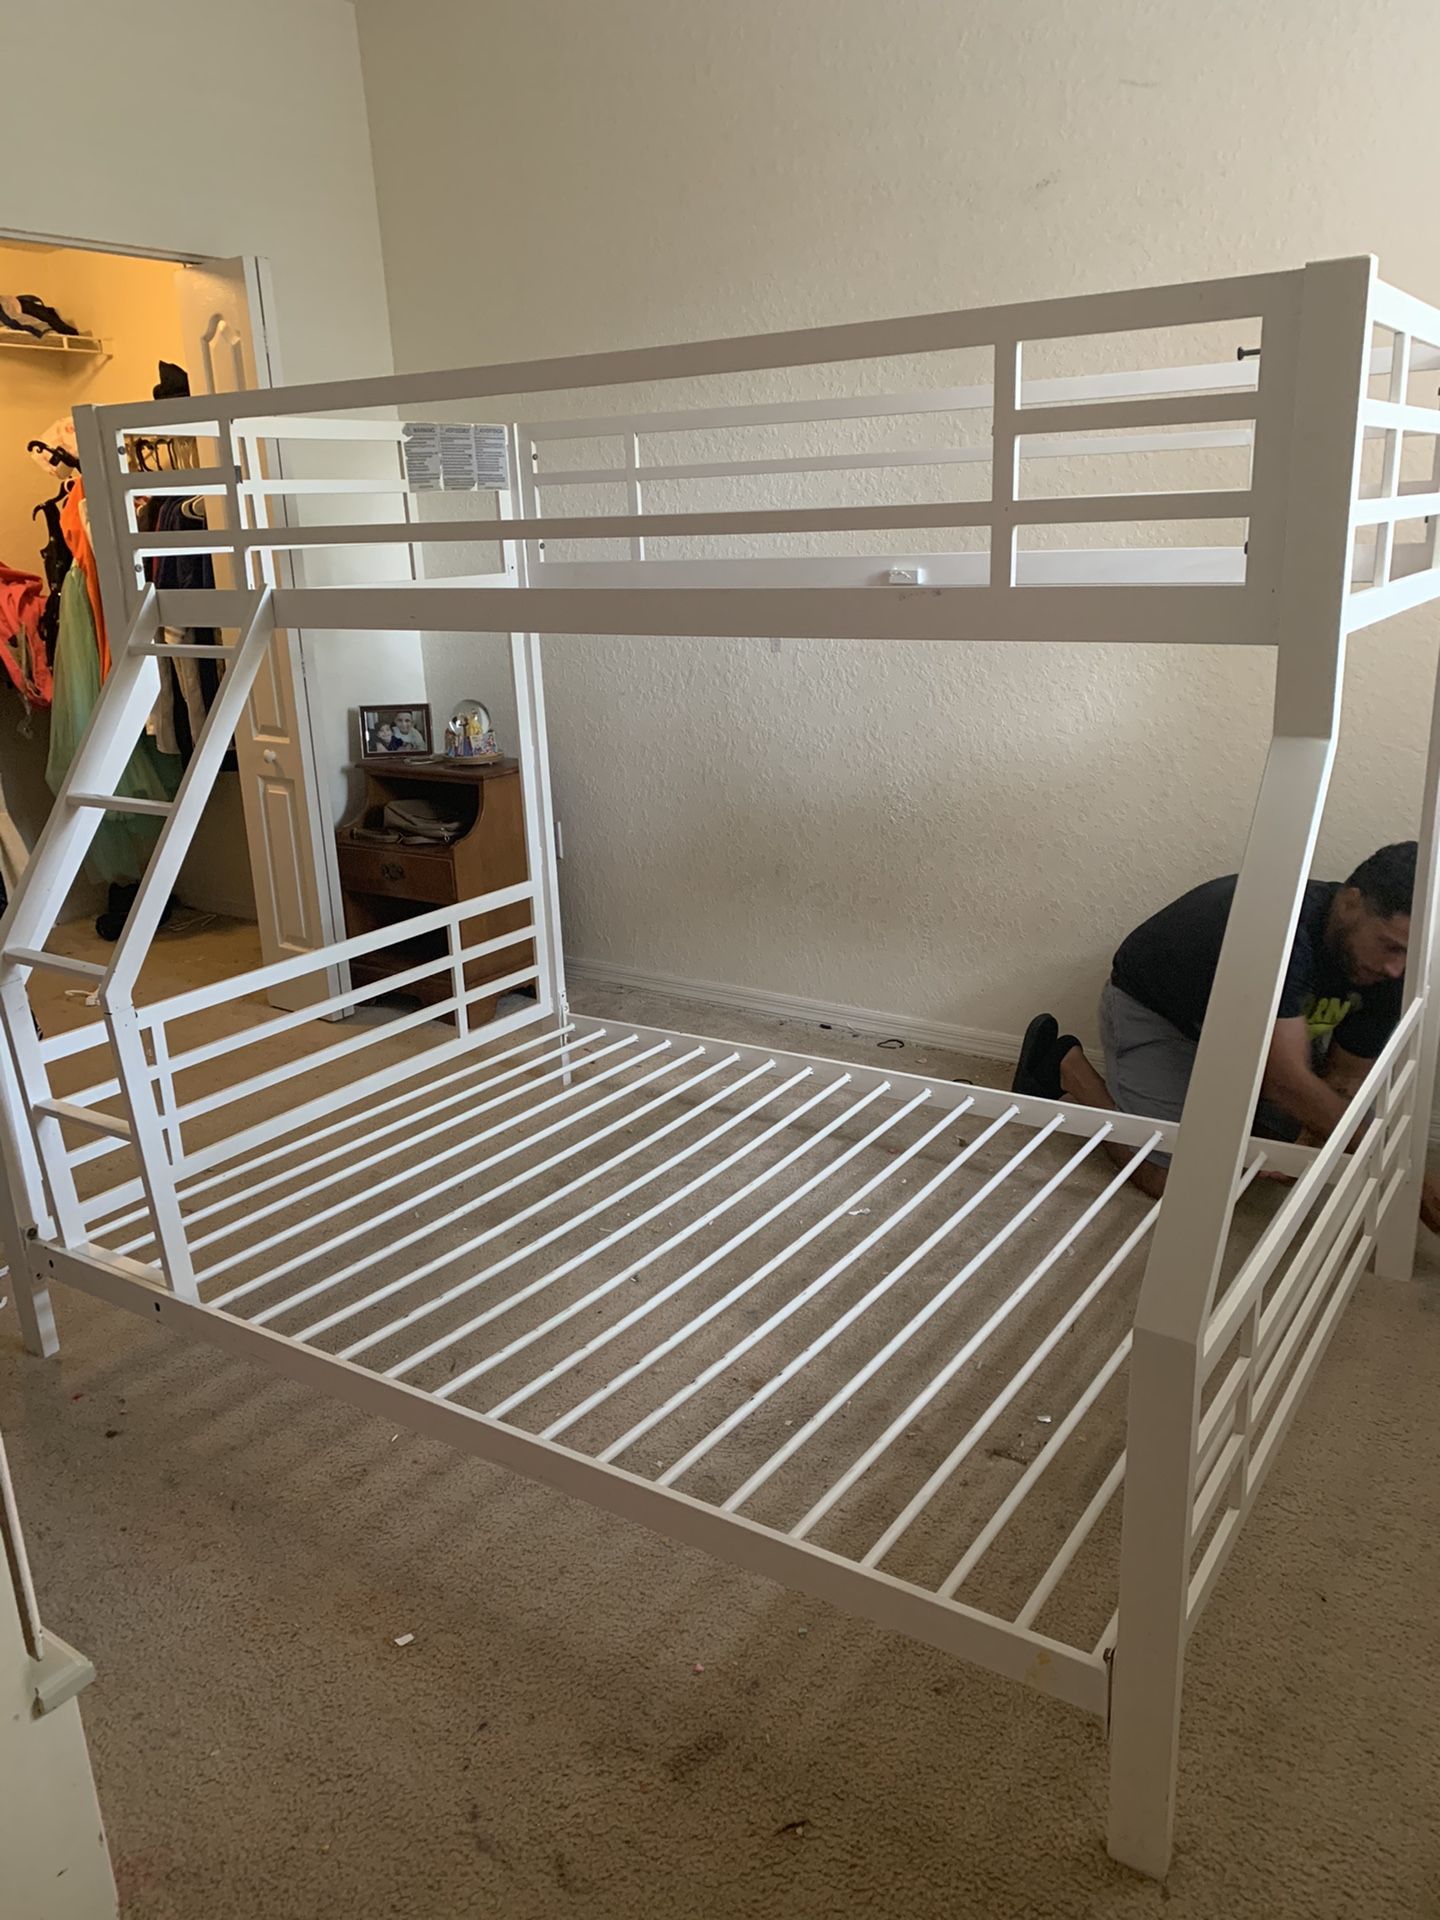 Bunk beds, including mattresses. Price reduced! Bottom is full size and top is twin.